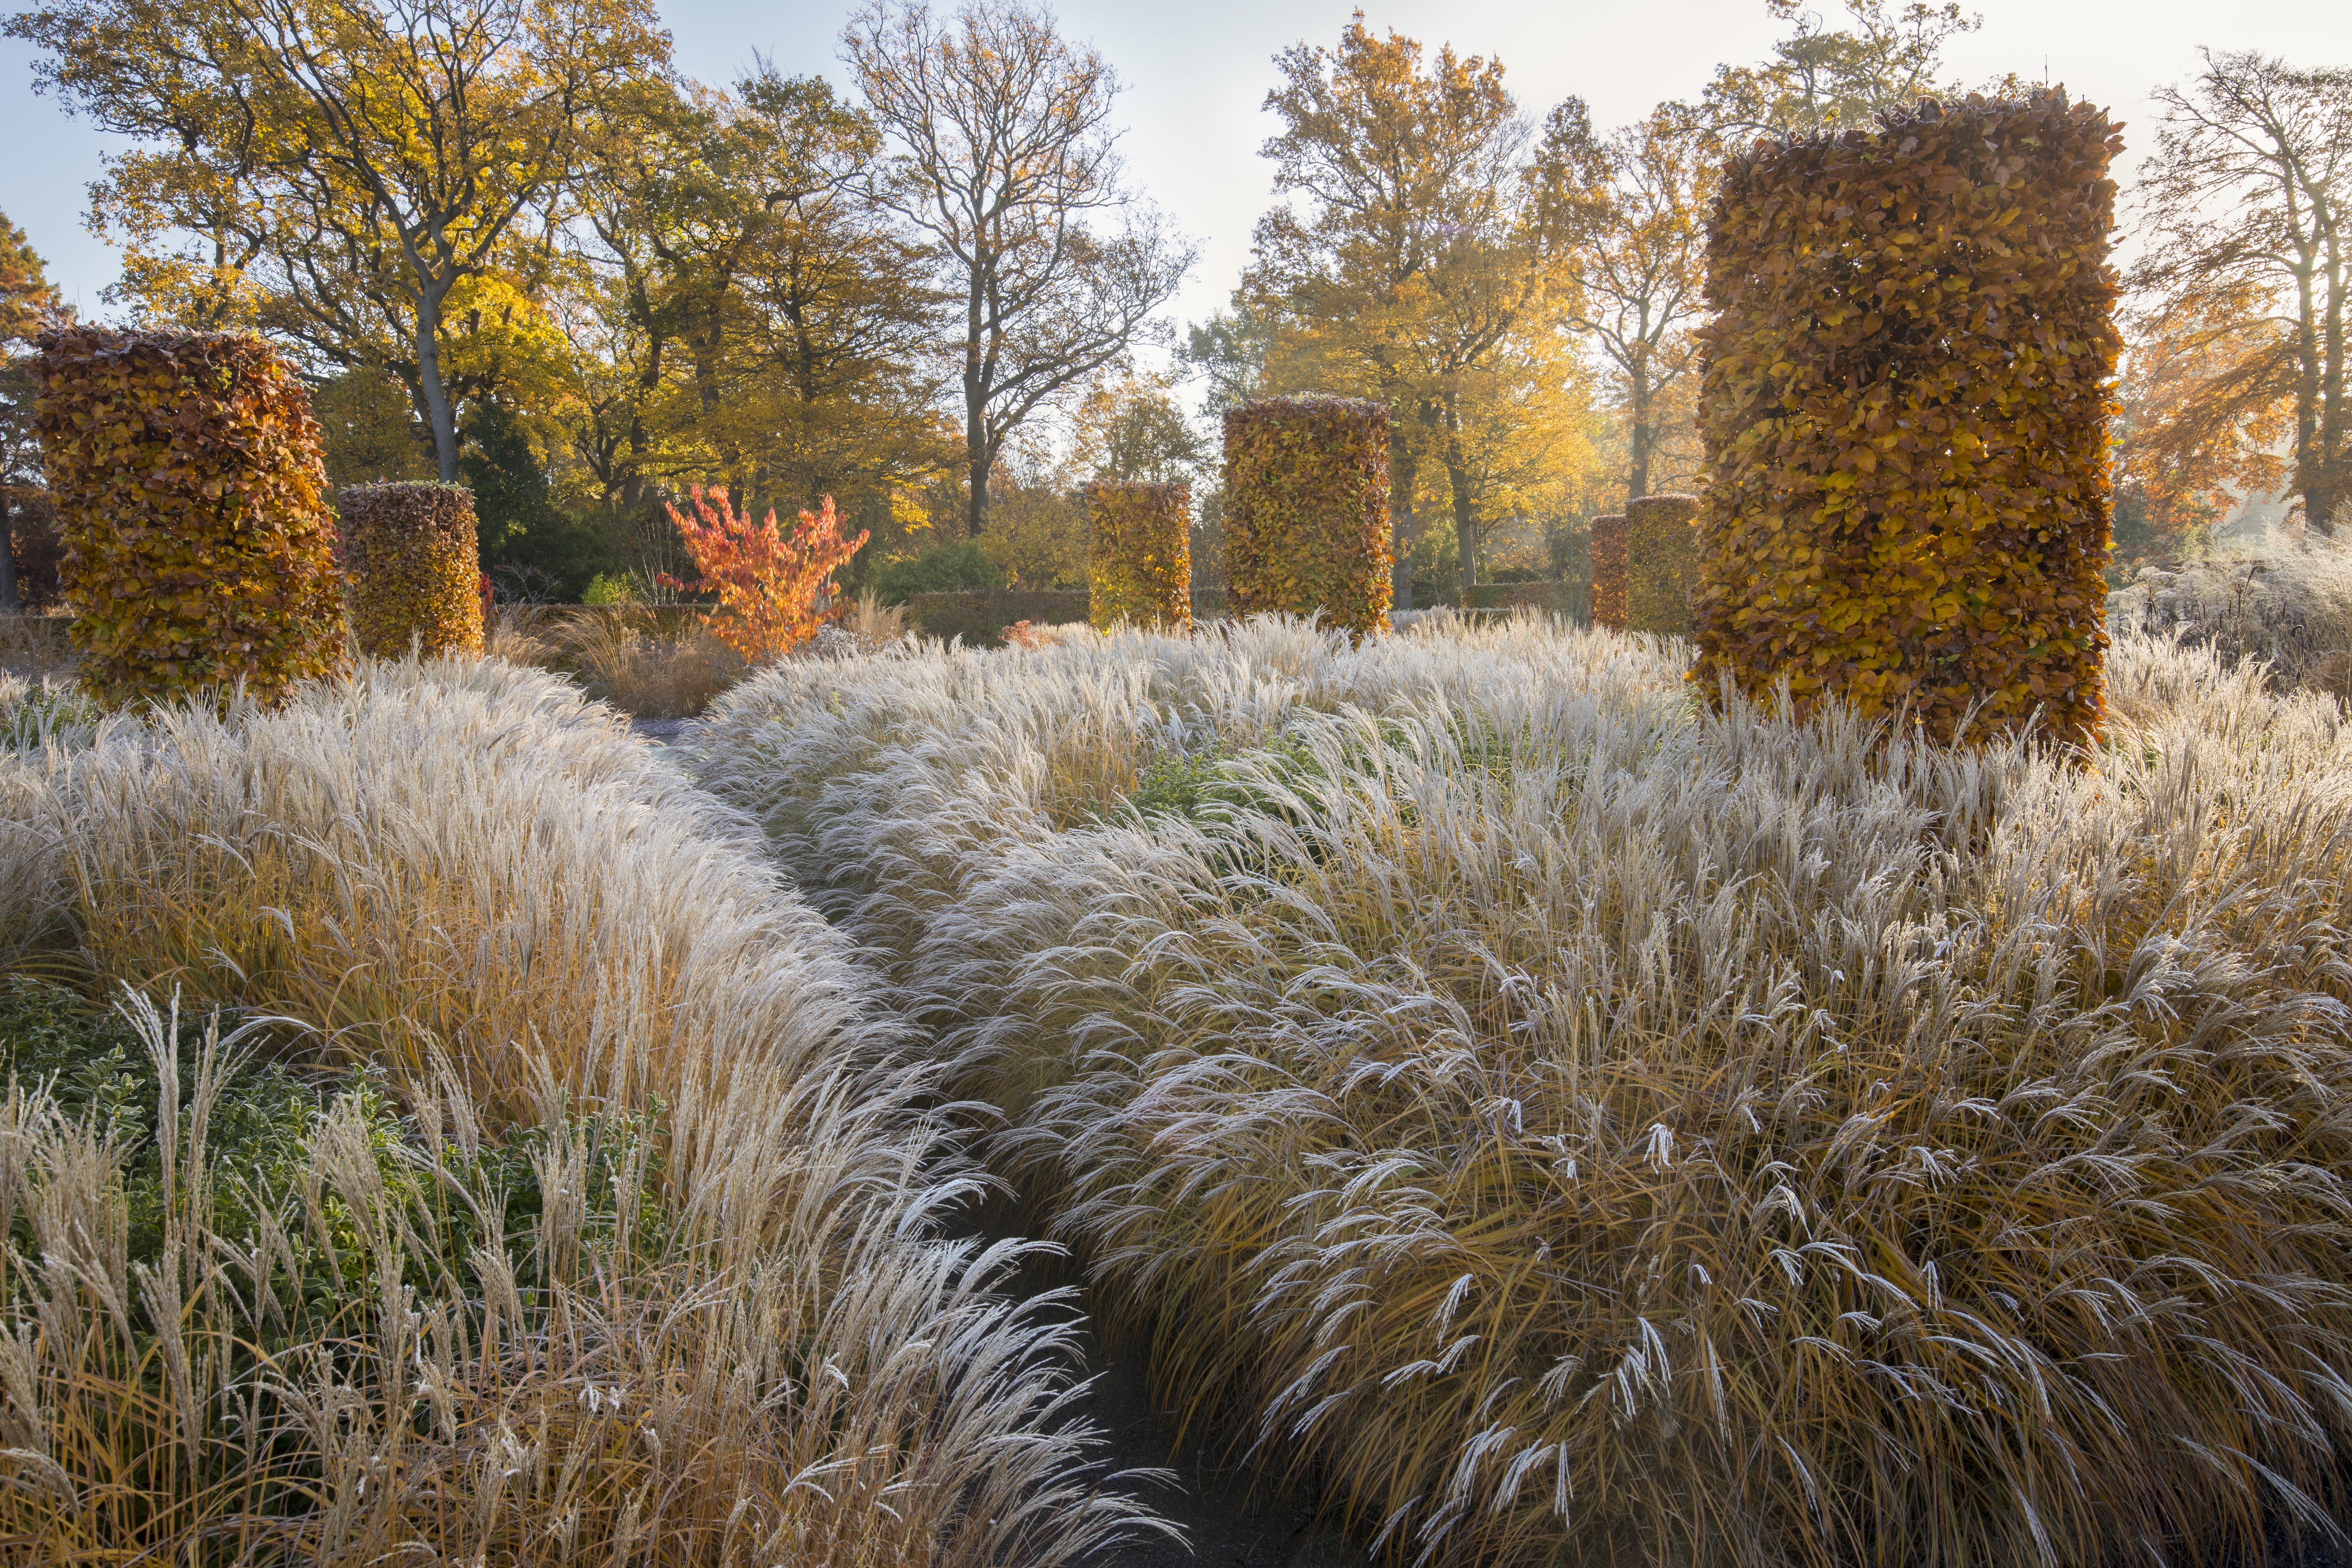 The Soft Hues of Autumn at RHS Wisley by Marianne Majerus wins the Celebrating Gardens category (Marianne Majerus/PA)